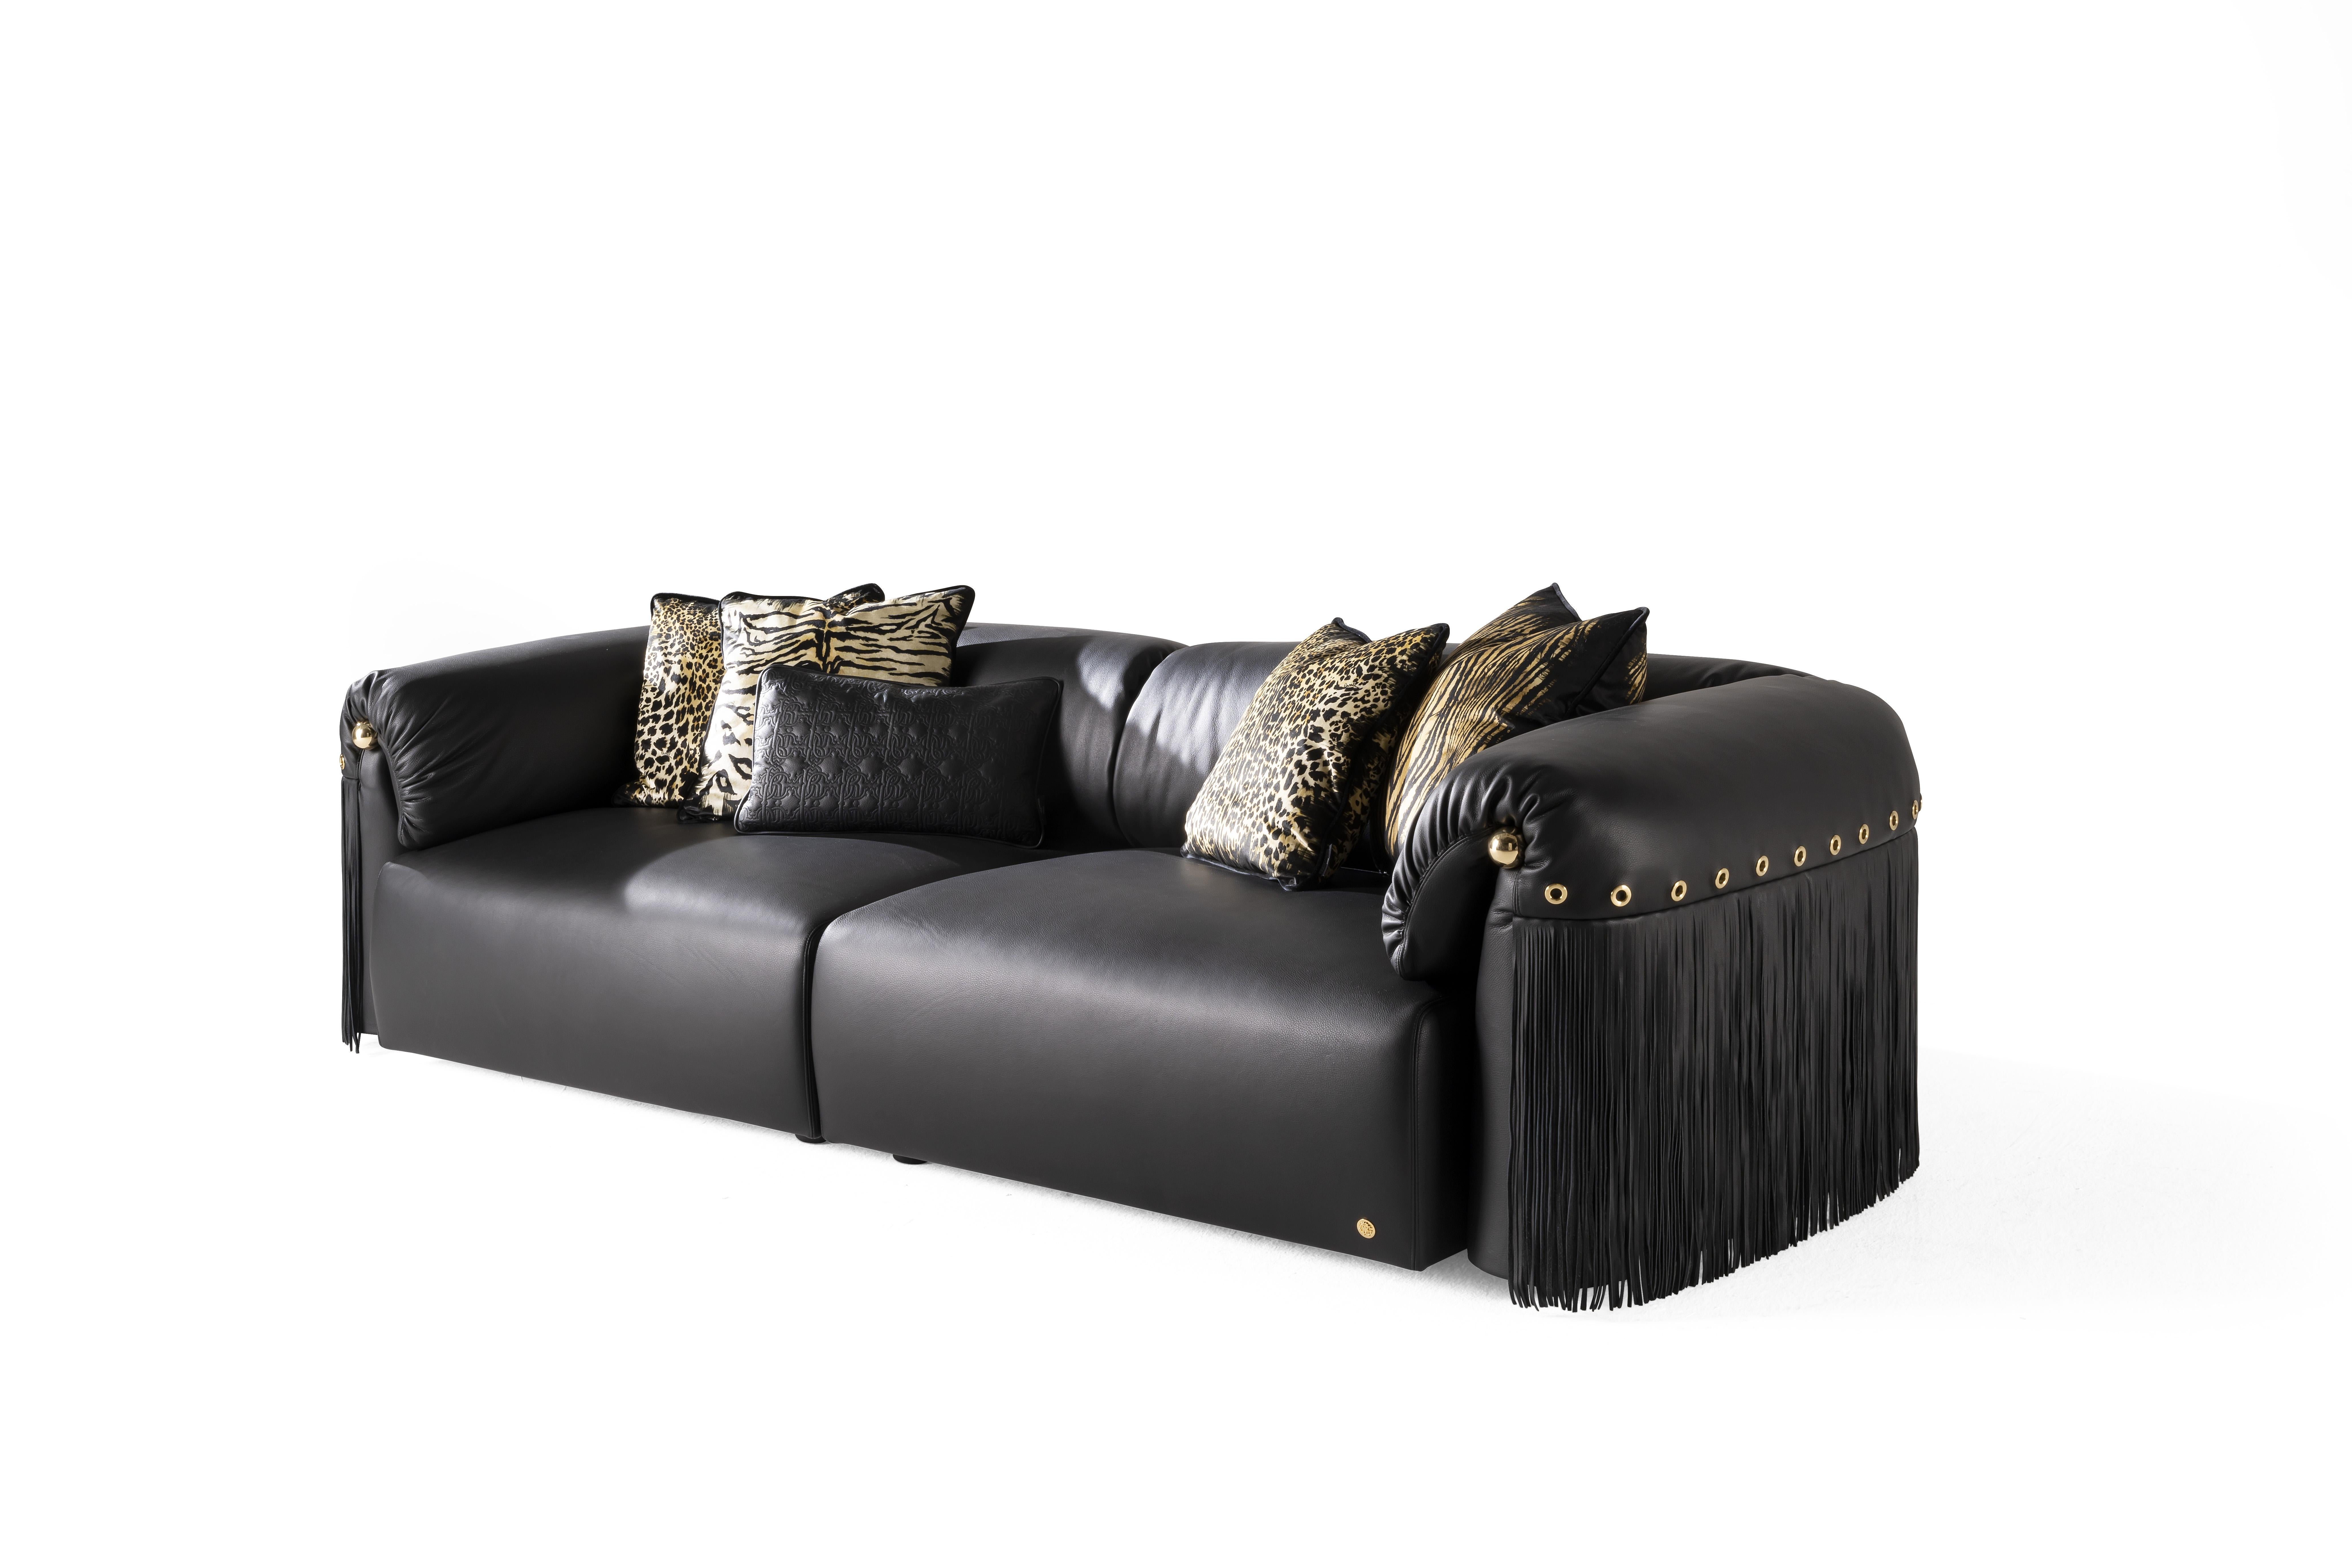 Malawi is a welcoming, refined and charming sofa whose design is inspired by the deepest soul of the brand Roberto Cavalli: a piece of furniture with a feminine and ultra-chic style that can be found in the seductive lines and in the sensuality of